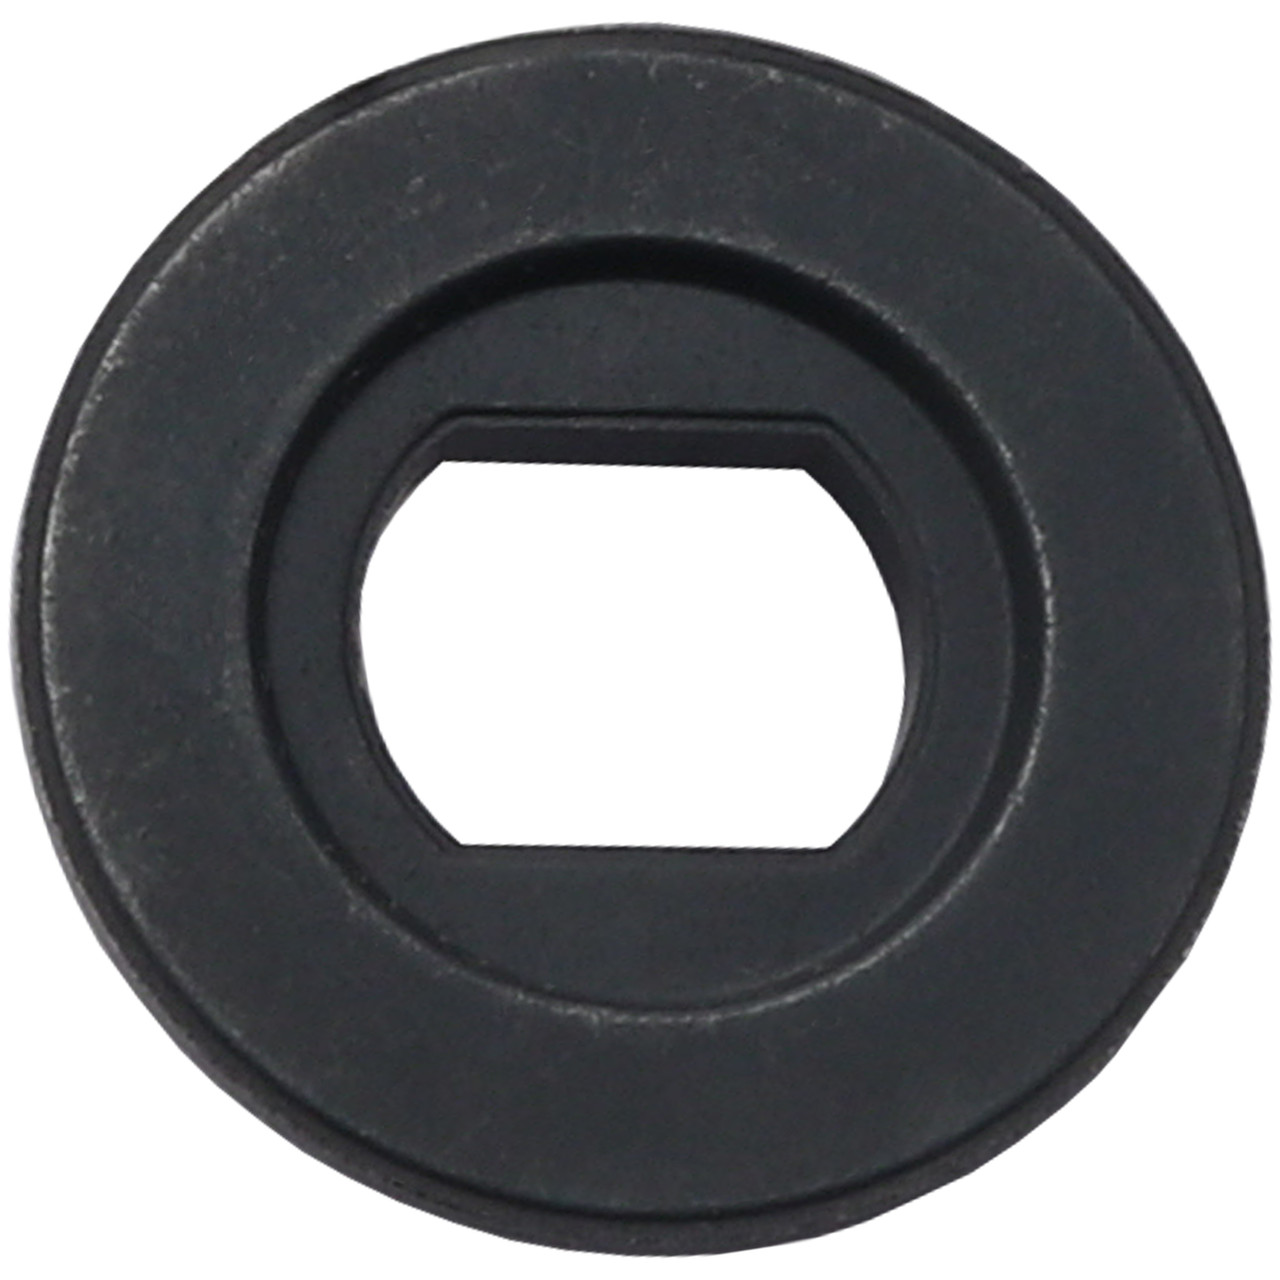 Dewalt N621119 Outer Clamp Washer Replacement Part for DC390K DCS392 DCS372B DC310 Helton Tool Home